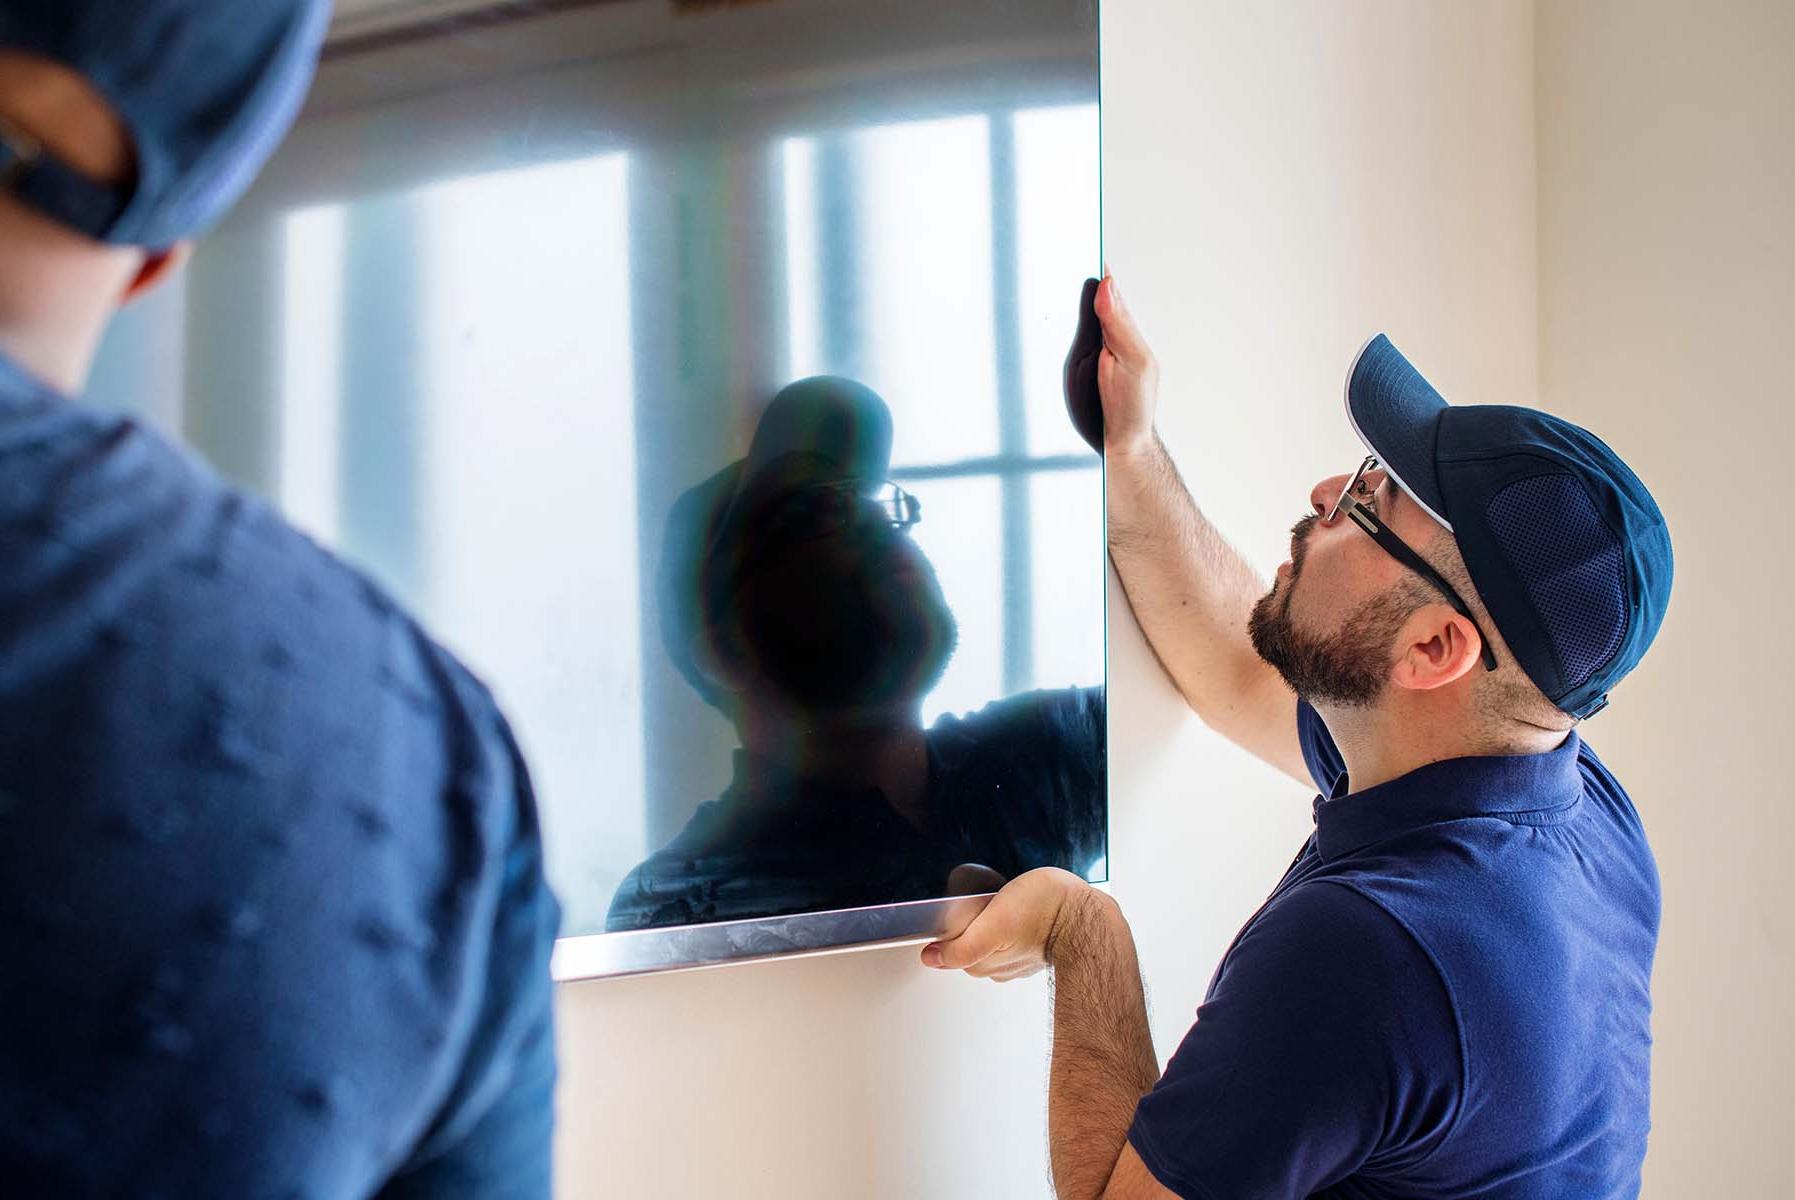 Man installing a TV on a wall.